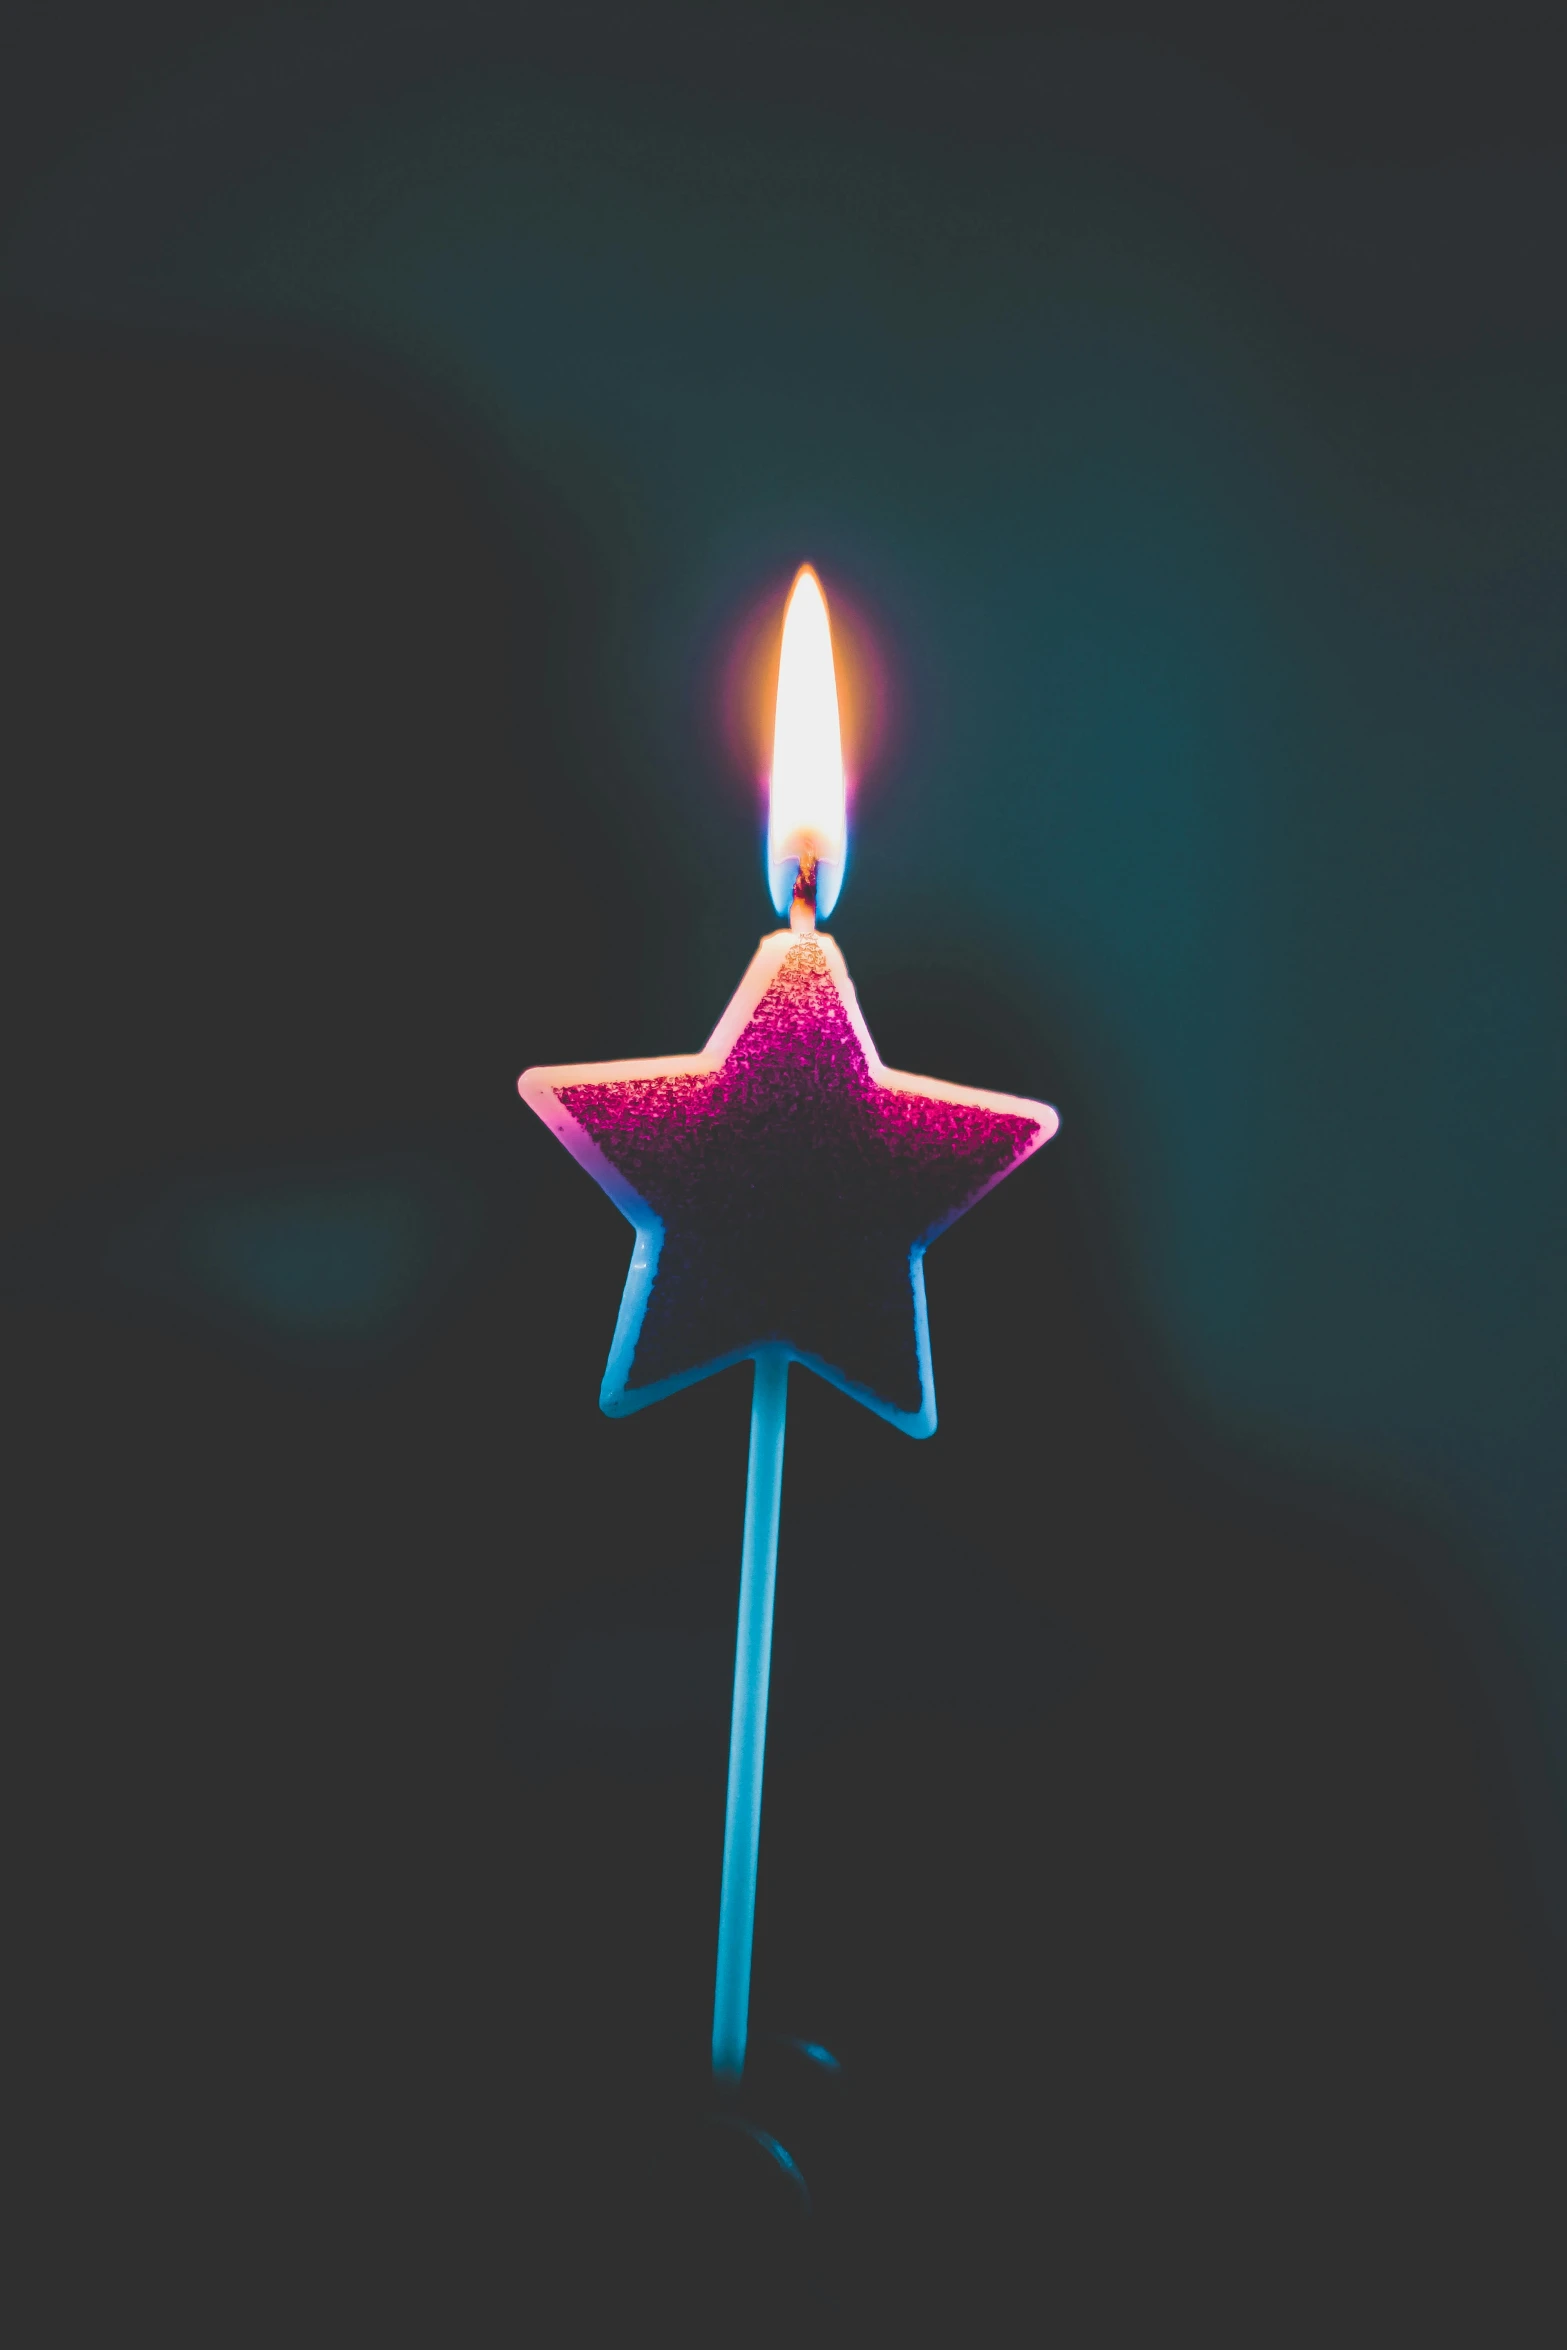 a lit candle in the shape of a star, an album cover, pexels, celebrating a birthday, profile picture, spangle, sports photo